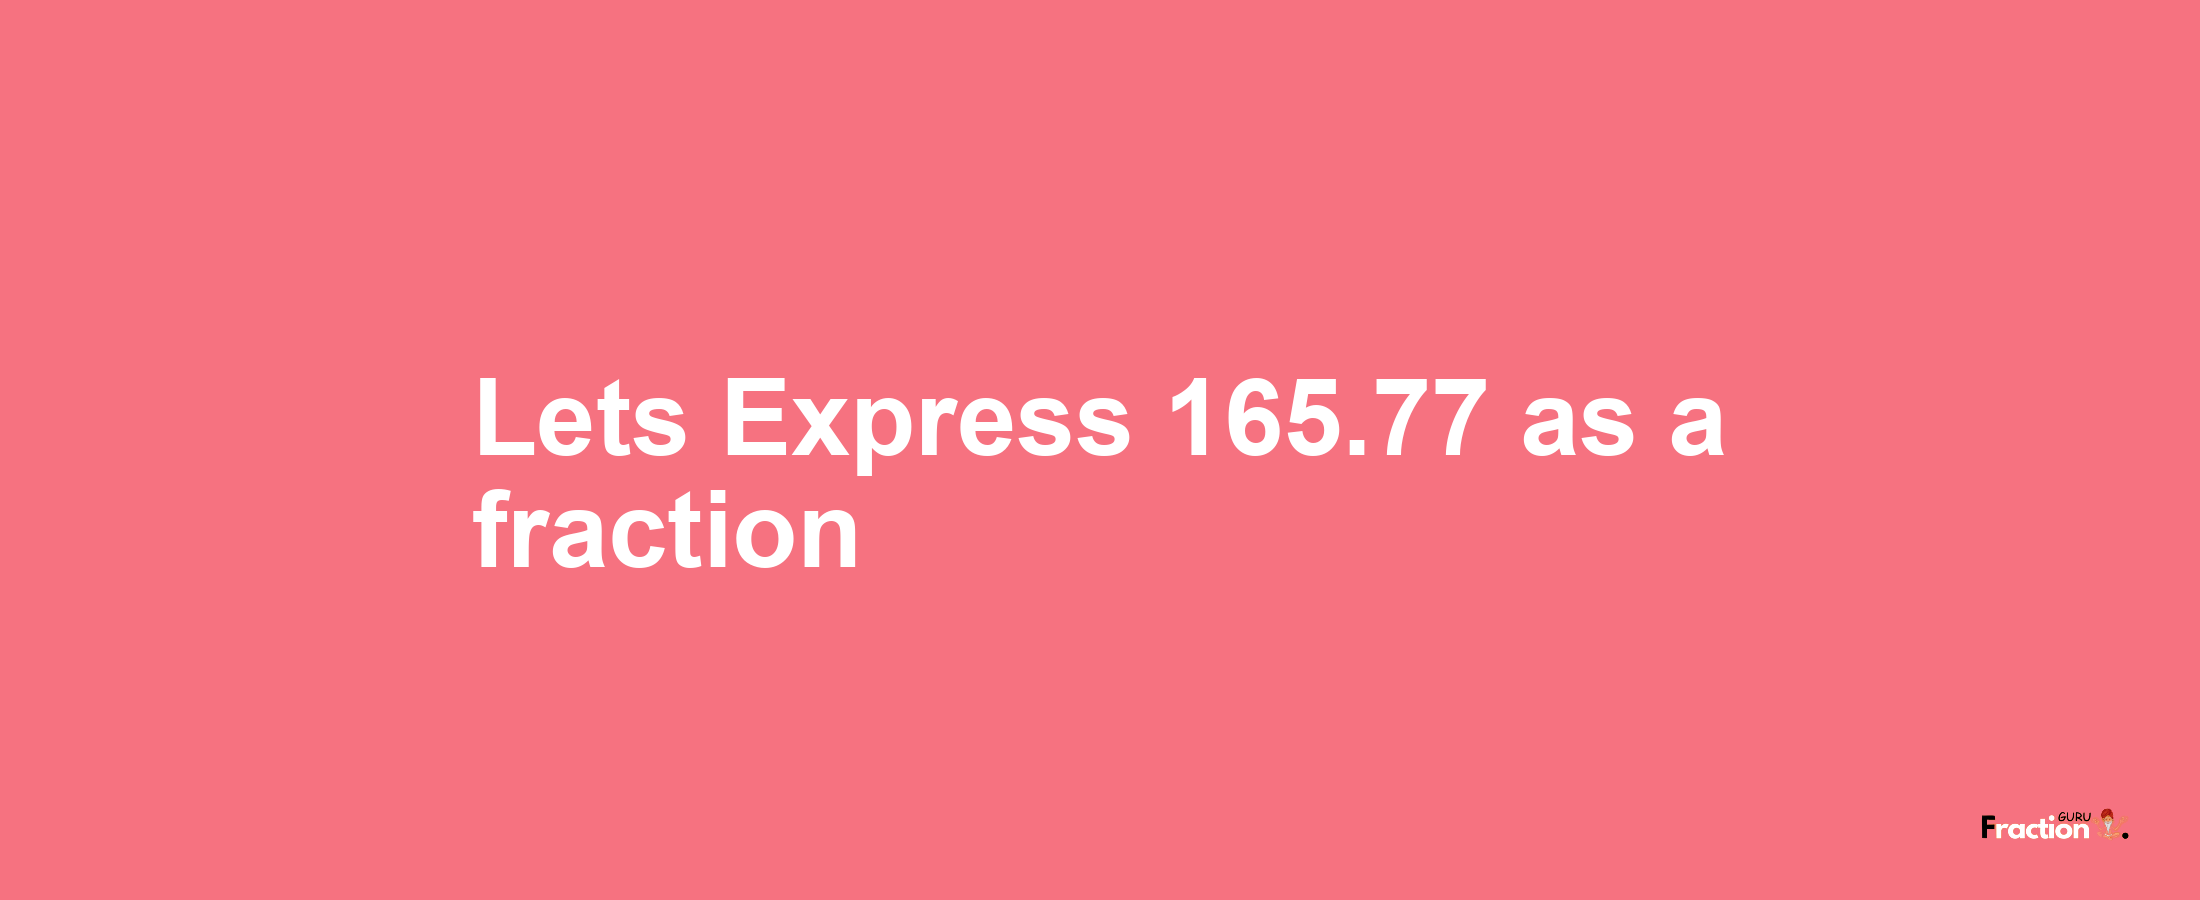 Lets Express 165.77 as afraction